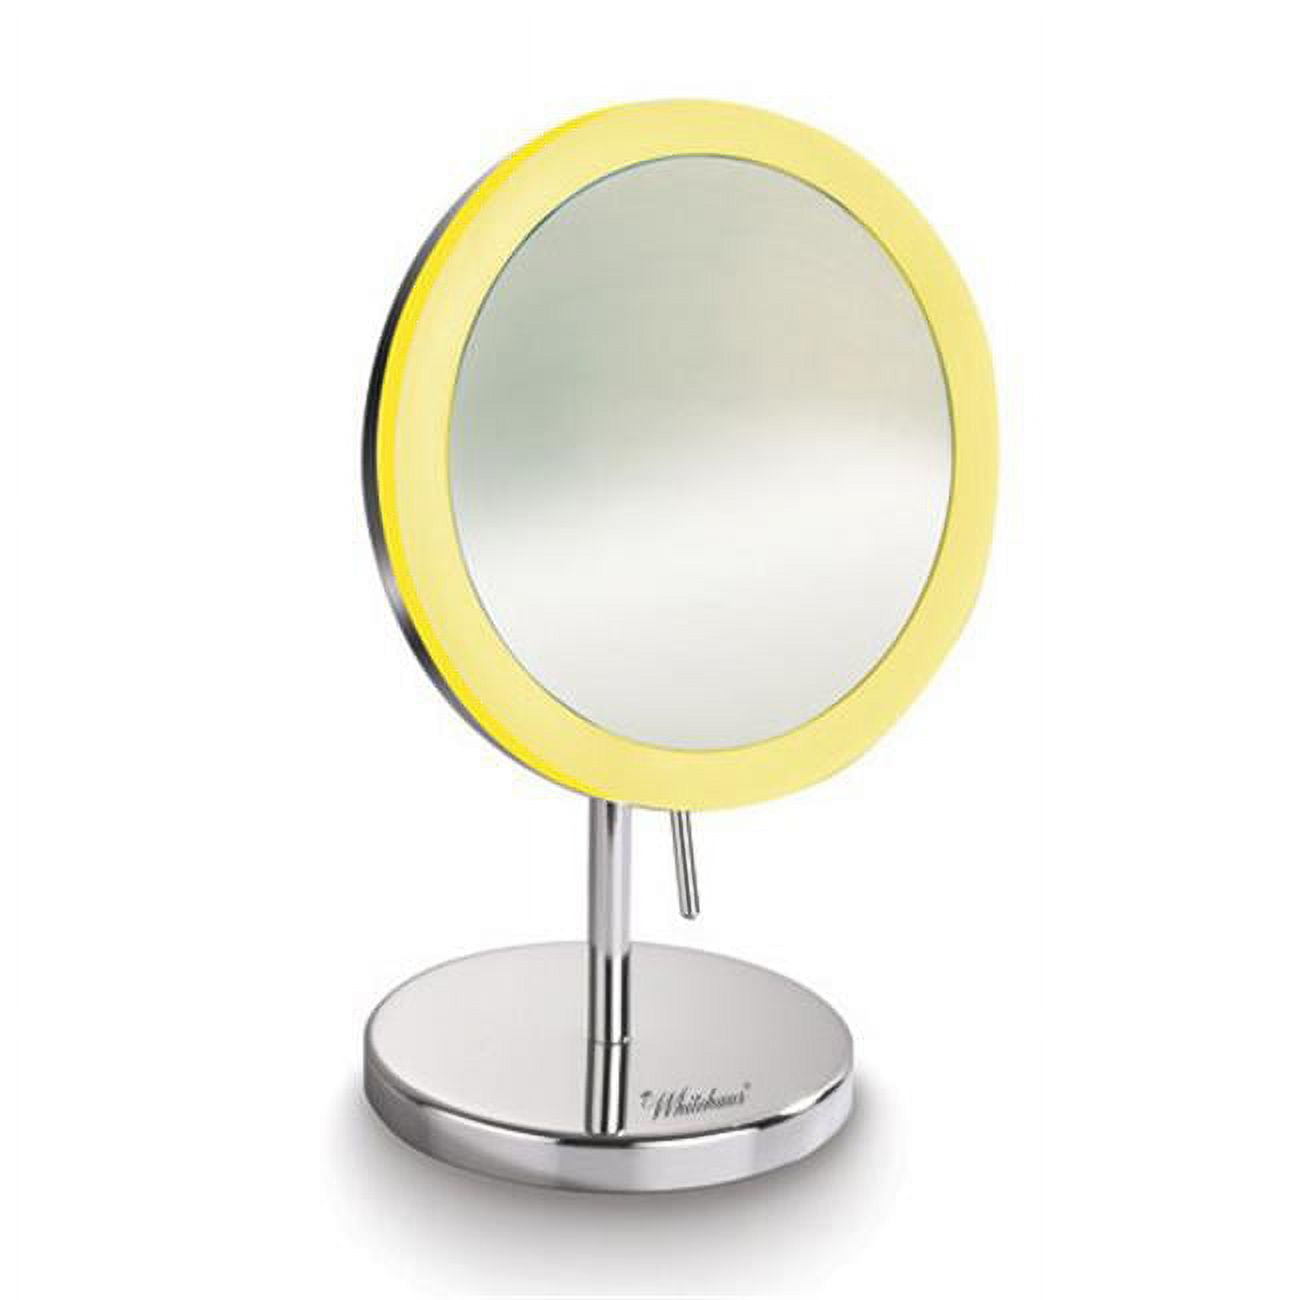 Whmr106-c Round Freestanding Led 5x Magnified Mirror - Polished Chrome